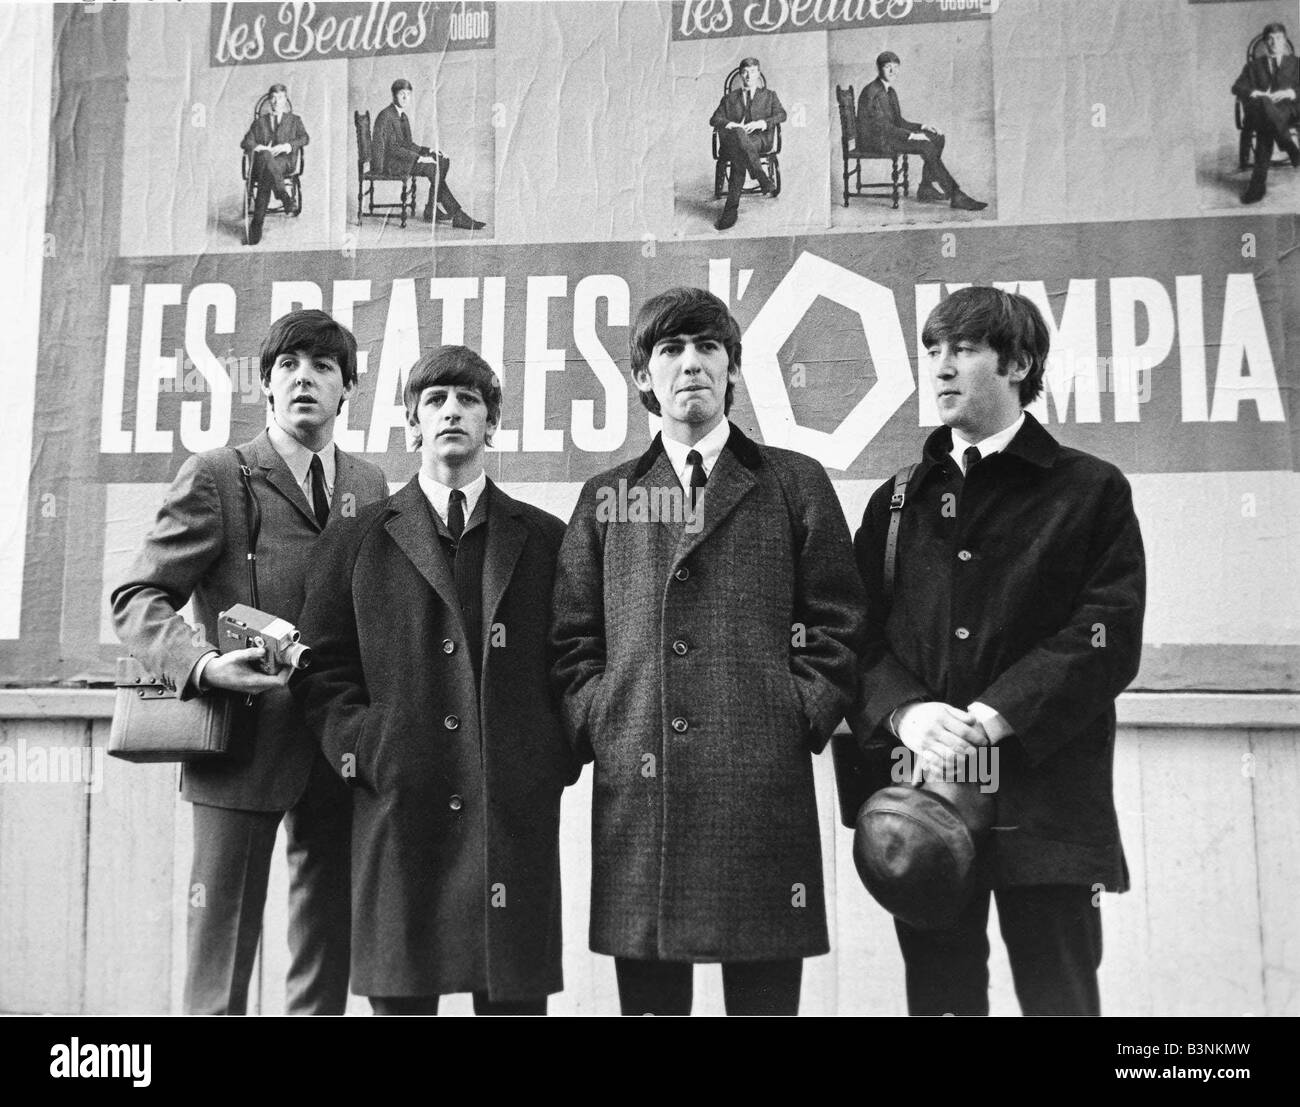 Beatles Files 1964 John Lennon Paul McCartney George Harrison and Ringo Starr at the Olympia in France 1964 Stock Photo